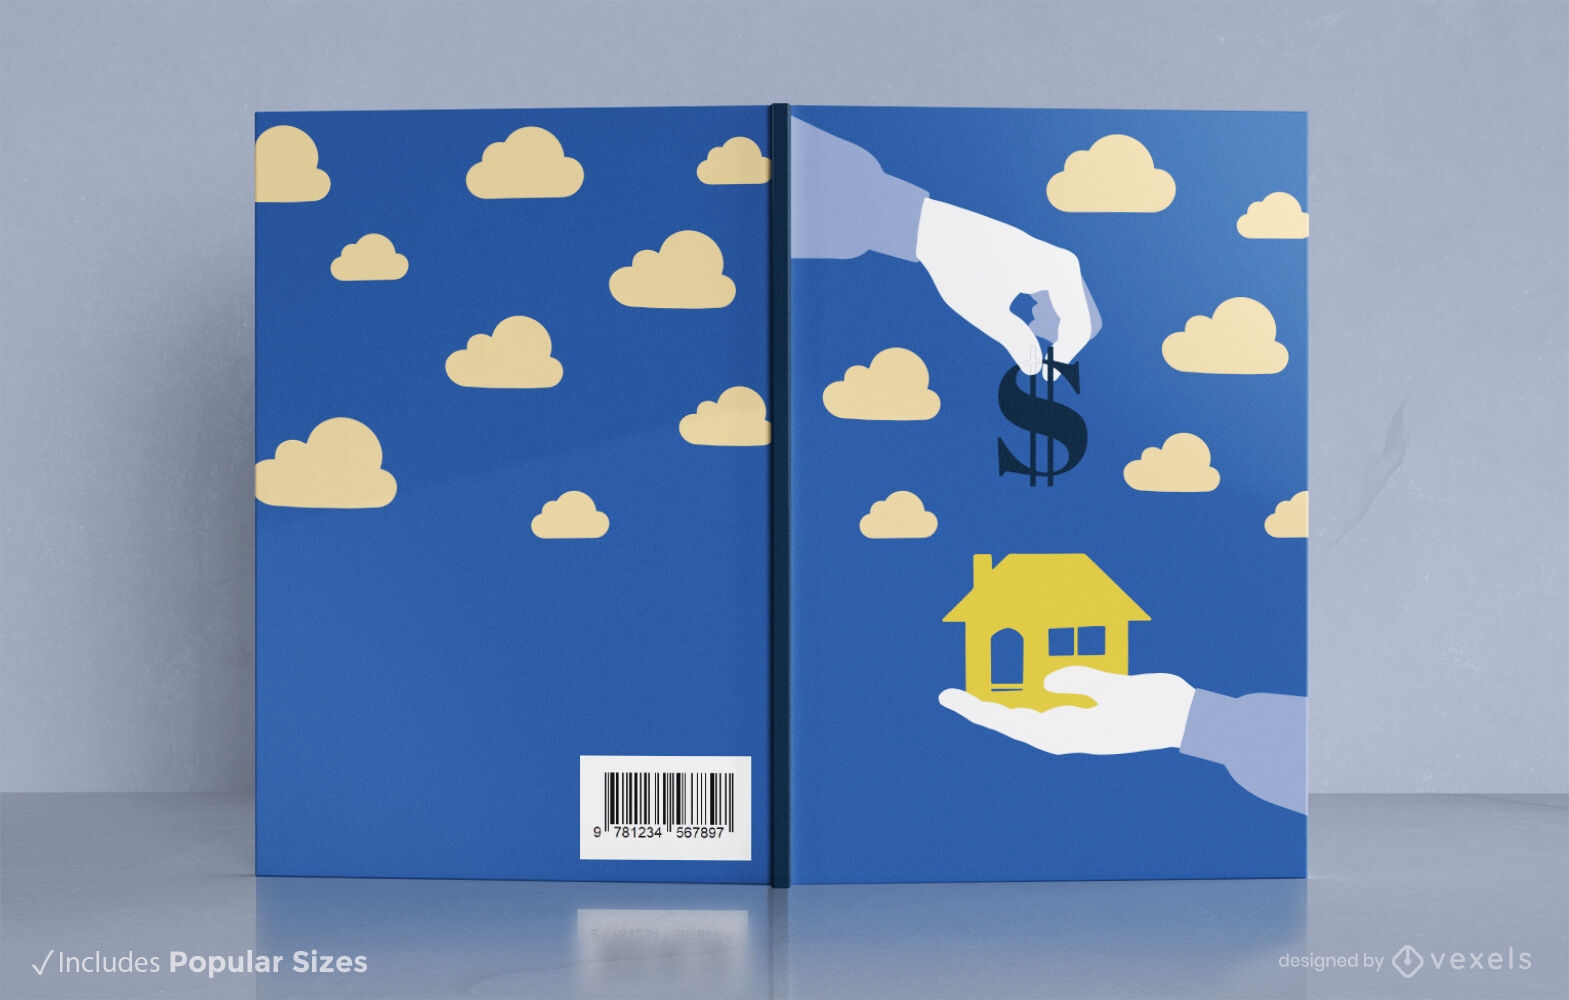 Investment and housing book cover design